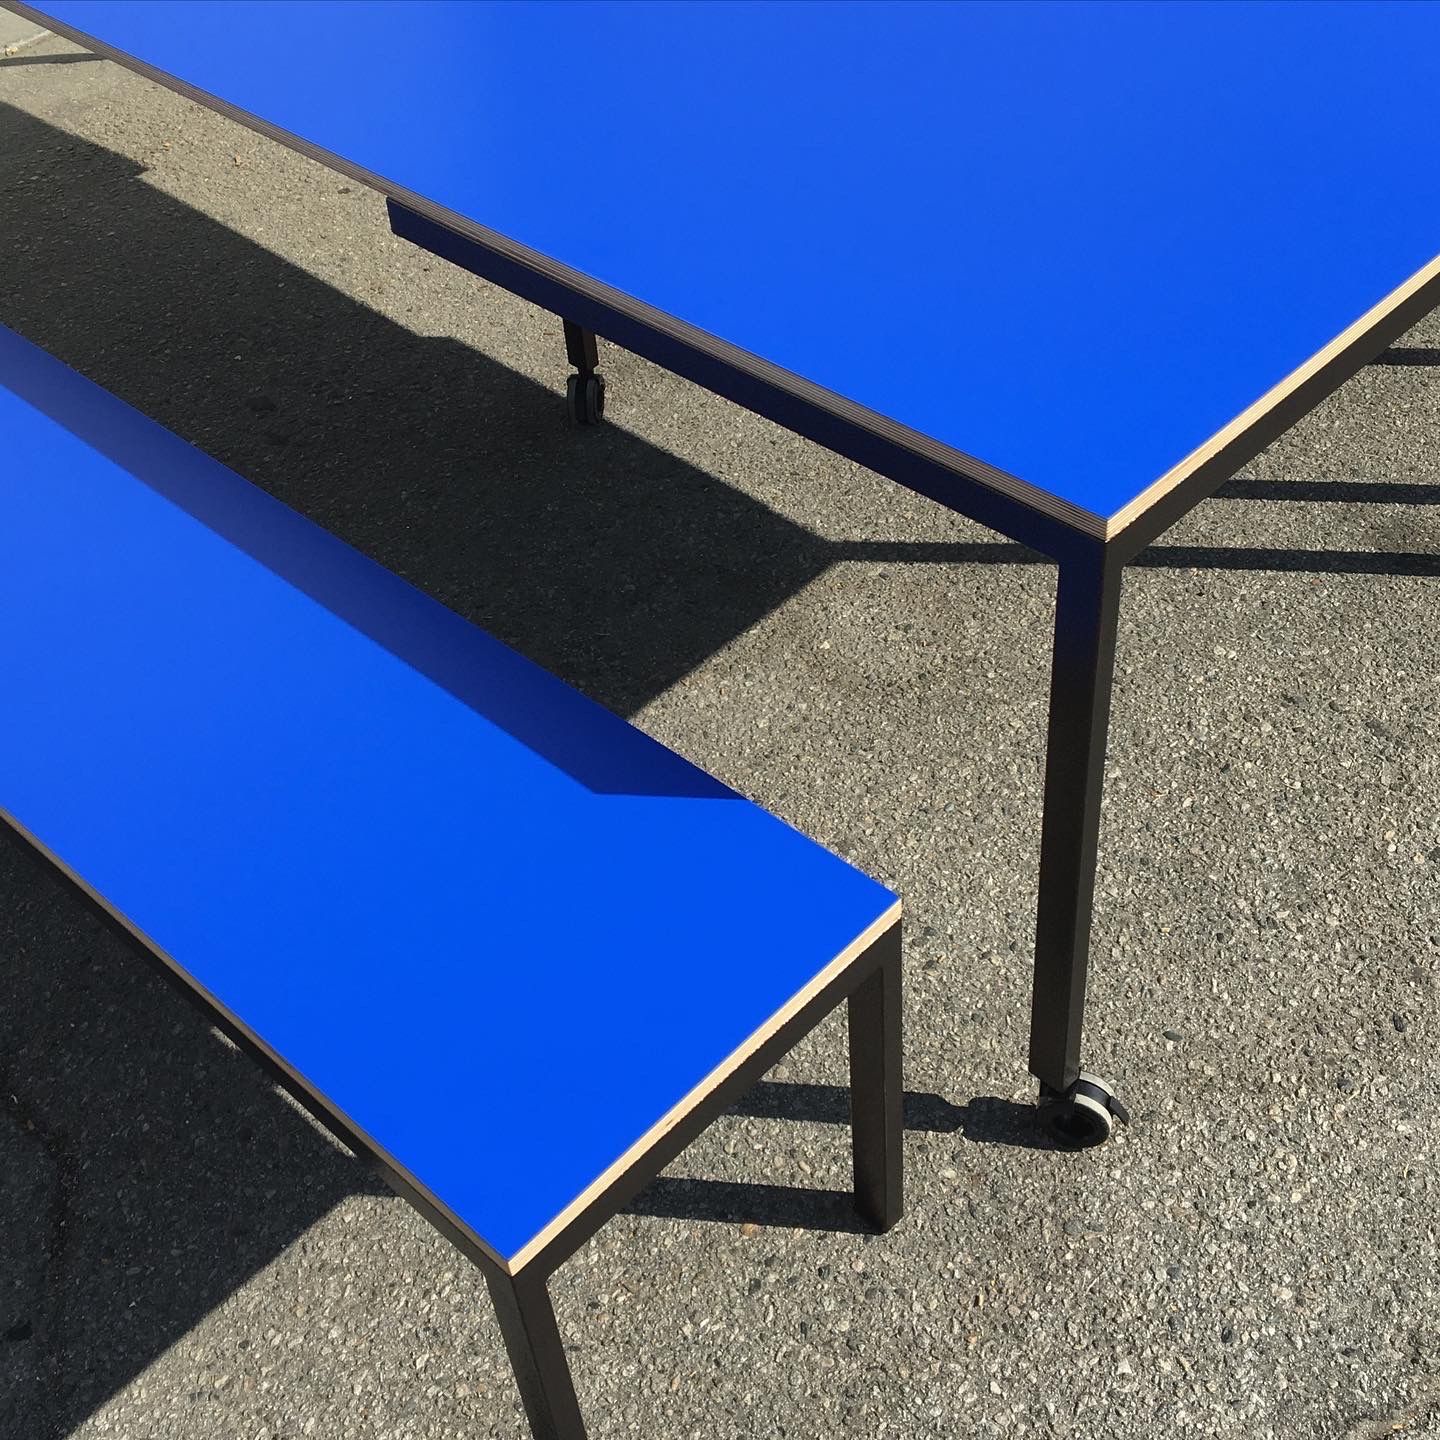  Steel Frame Rectangle Table Set product image 4